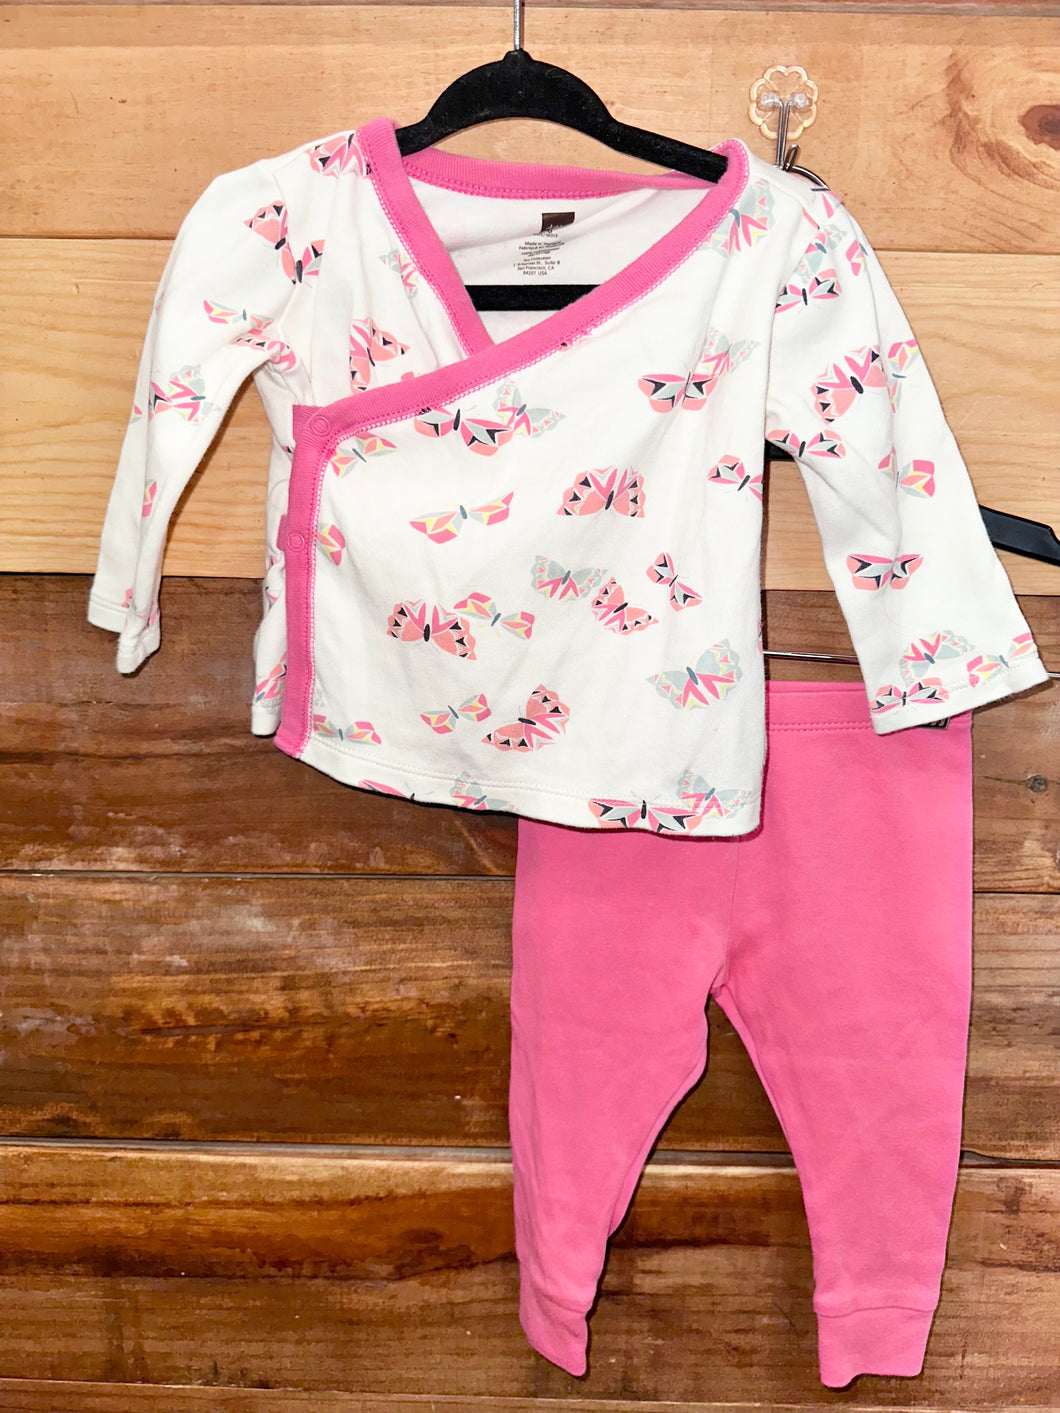 Tea Collection Pink Butterfly 2pc Outfit Size 3-6m